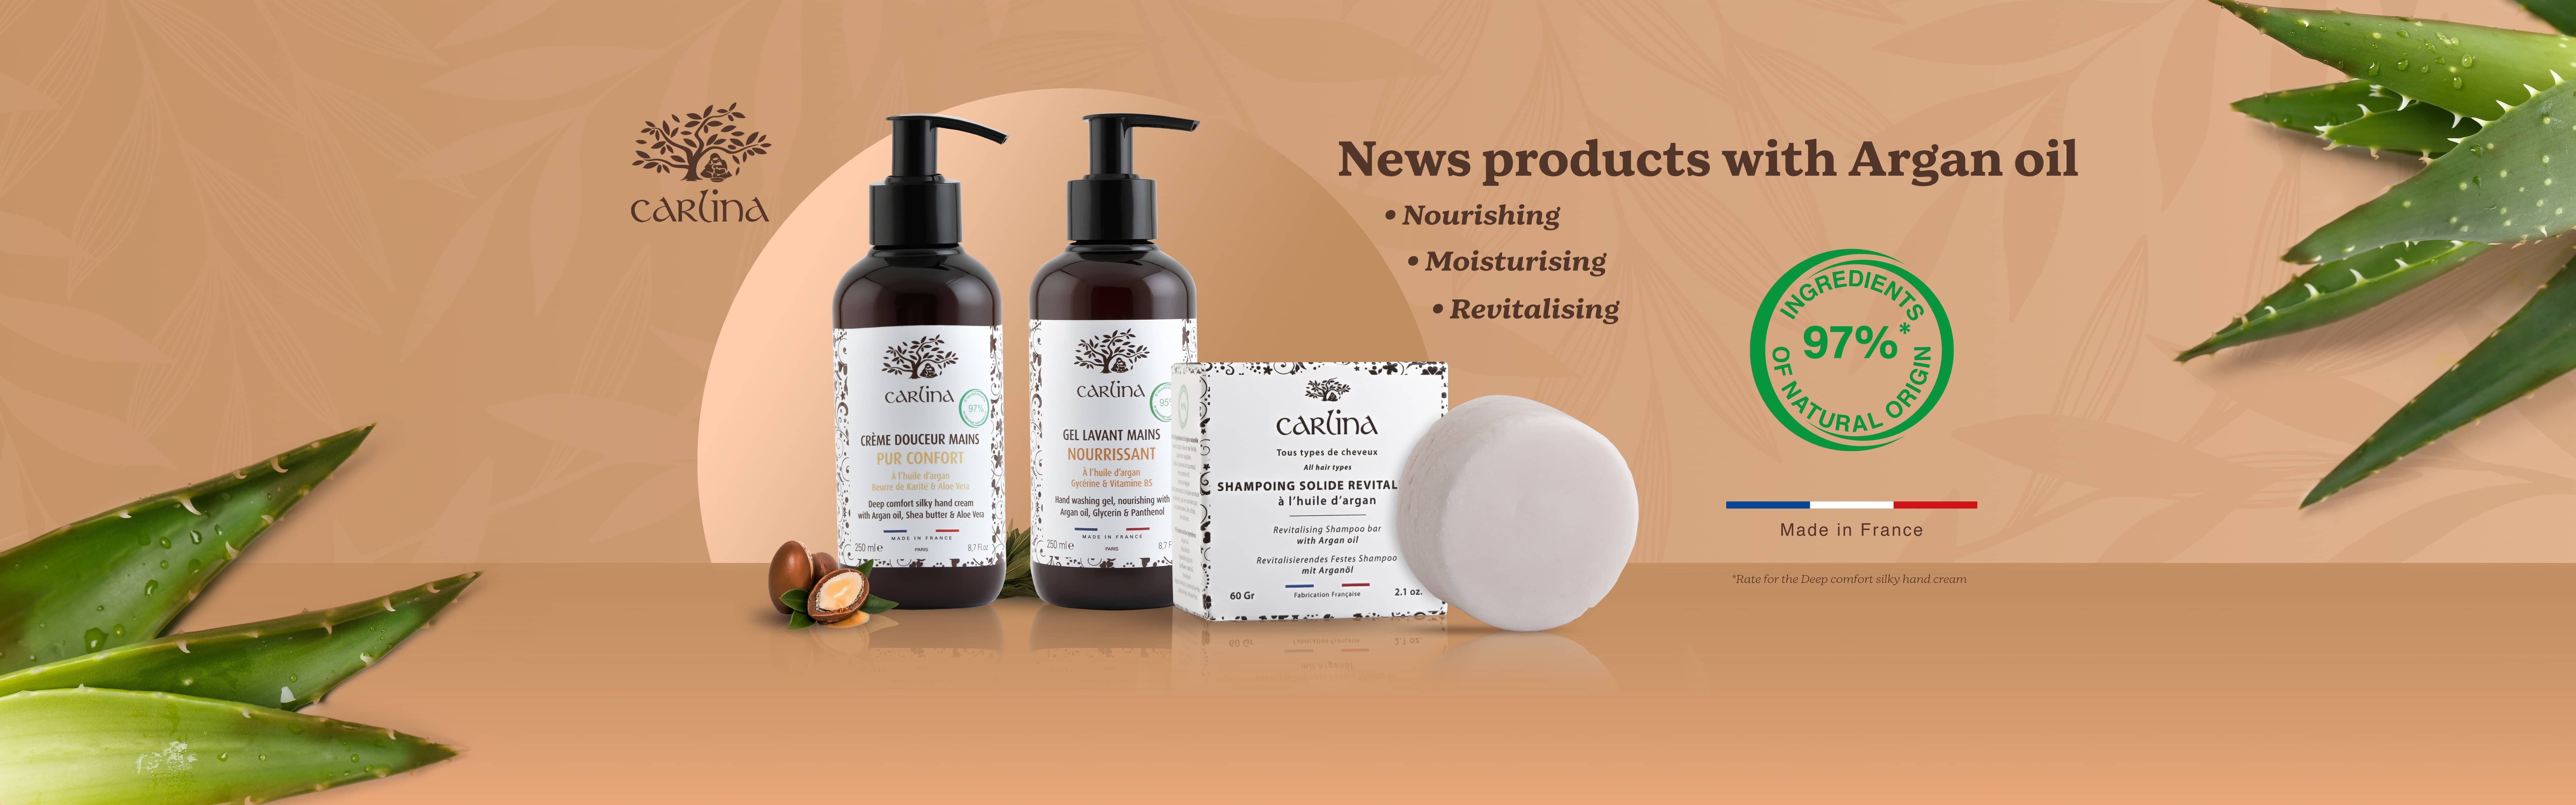 News products with Argan oil